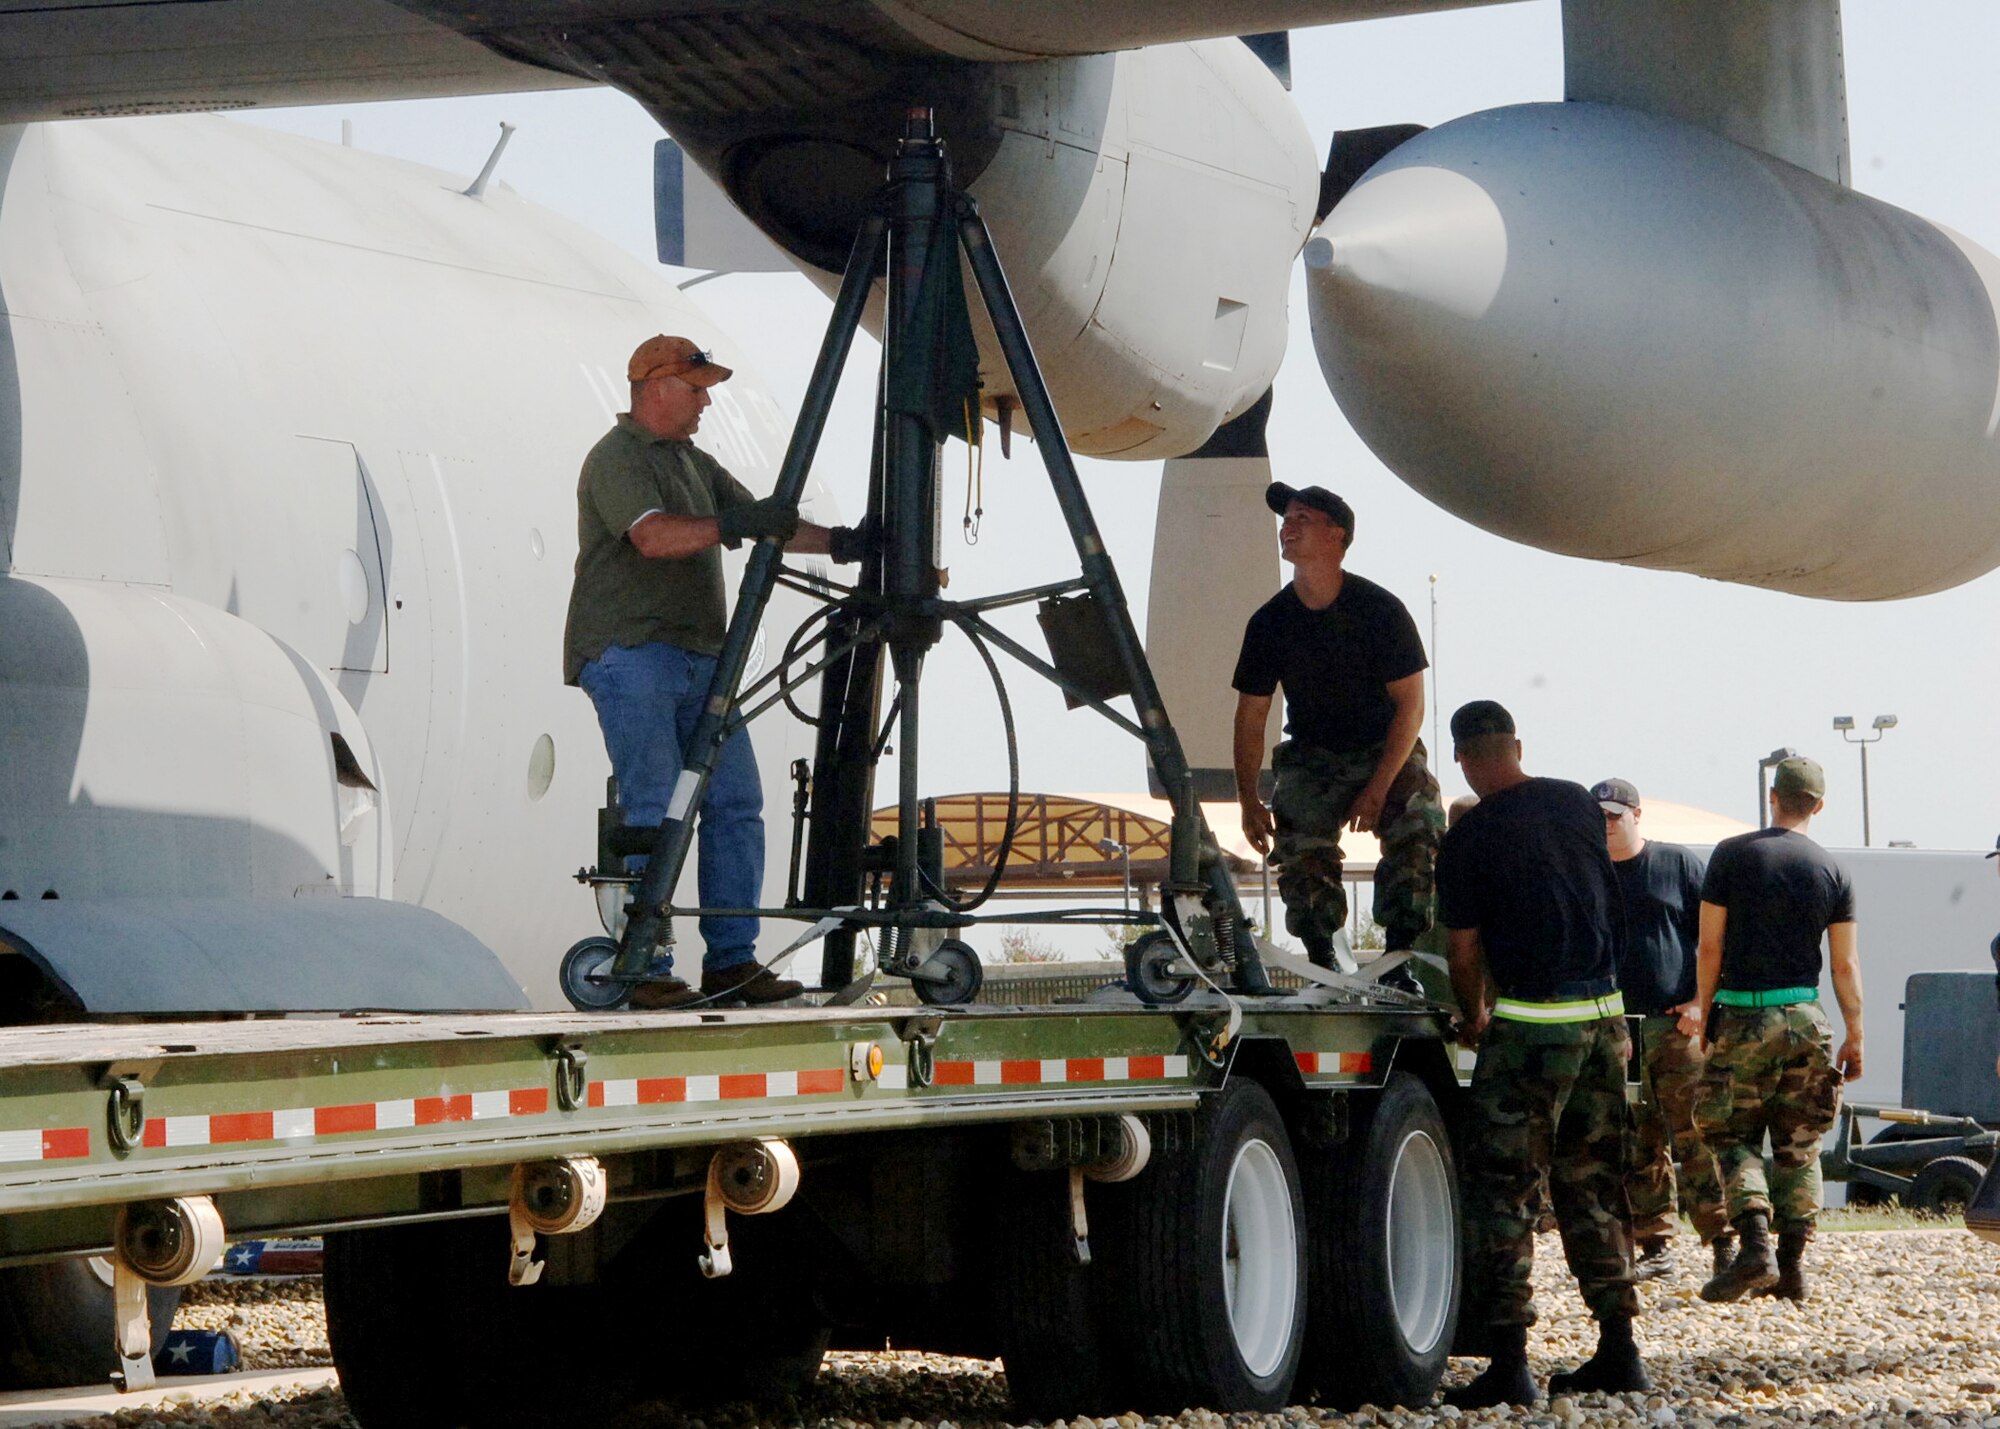 DYESS AIR FORCE BASE, Texas -- Tech. Sgt. Christopher Ellis, 7th Mission Support Squadron, and members of the 317th Aircraft Maintenance Squadron seat a jack to secure a retired C-130 June 11. High winds in the area have moved the static aircraft, displayed at the front gate, approximately three feet over the last several years. (U.S. Air Force photo/Airman 1st Class Felicia Juenke)